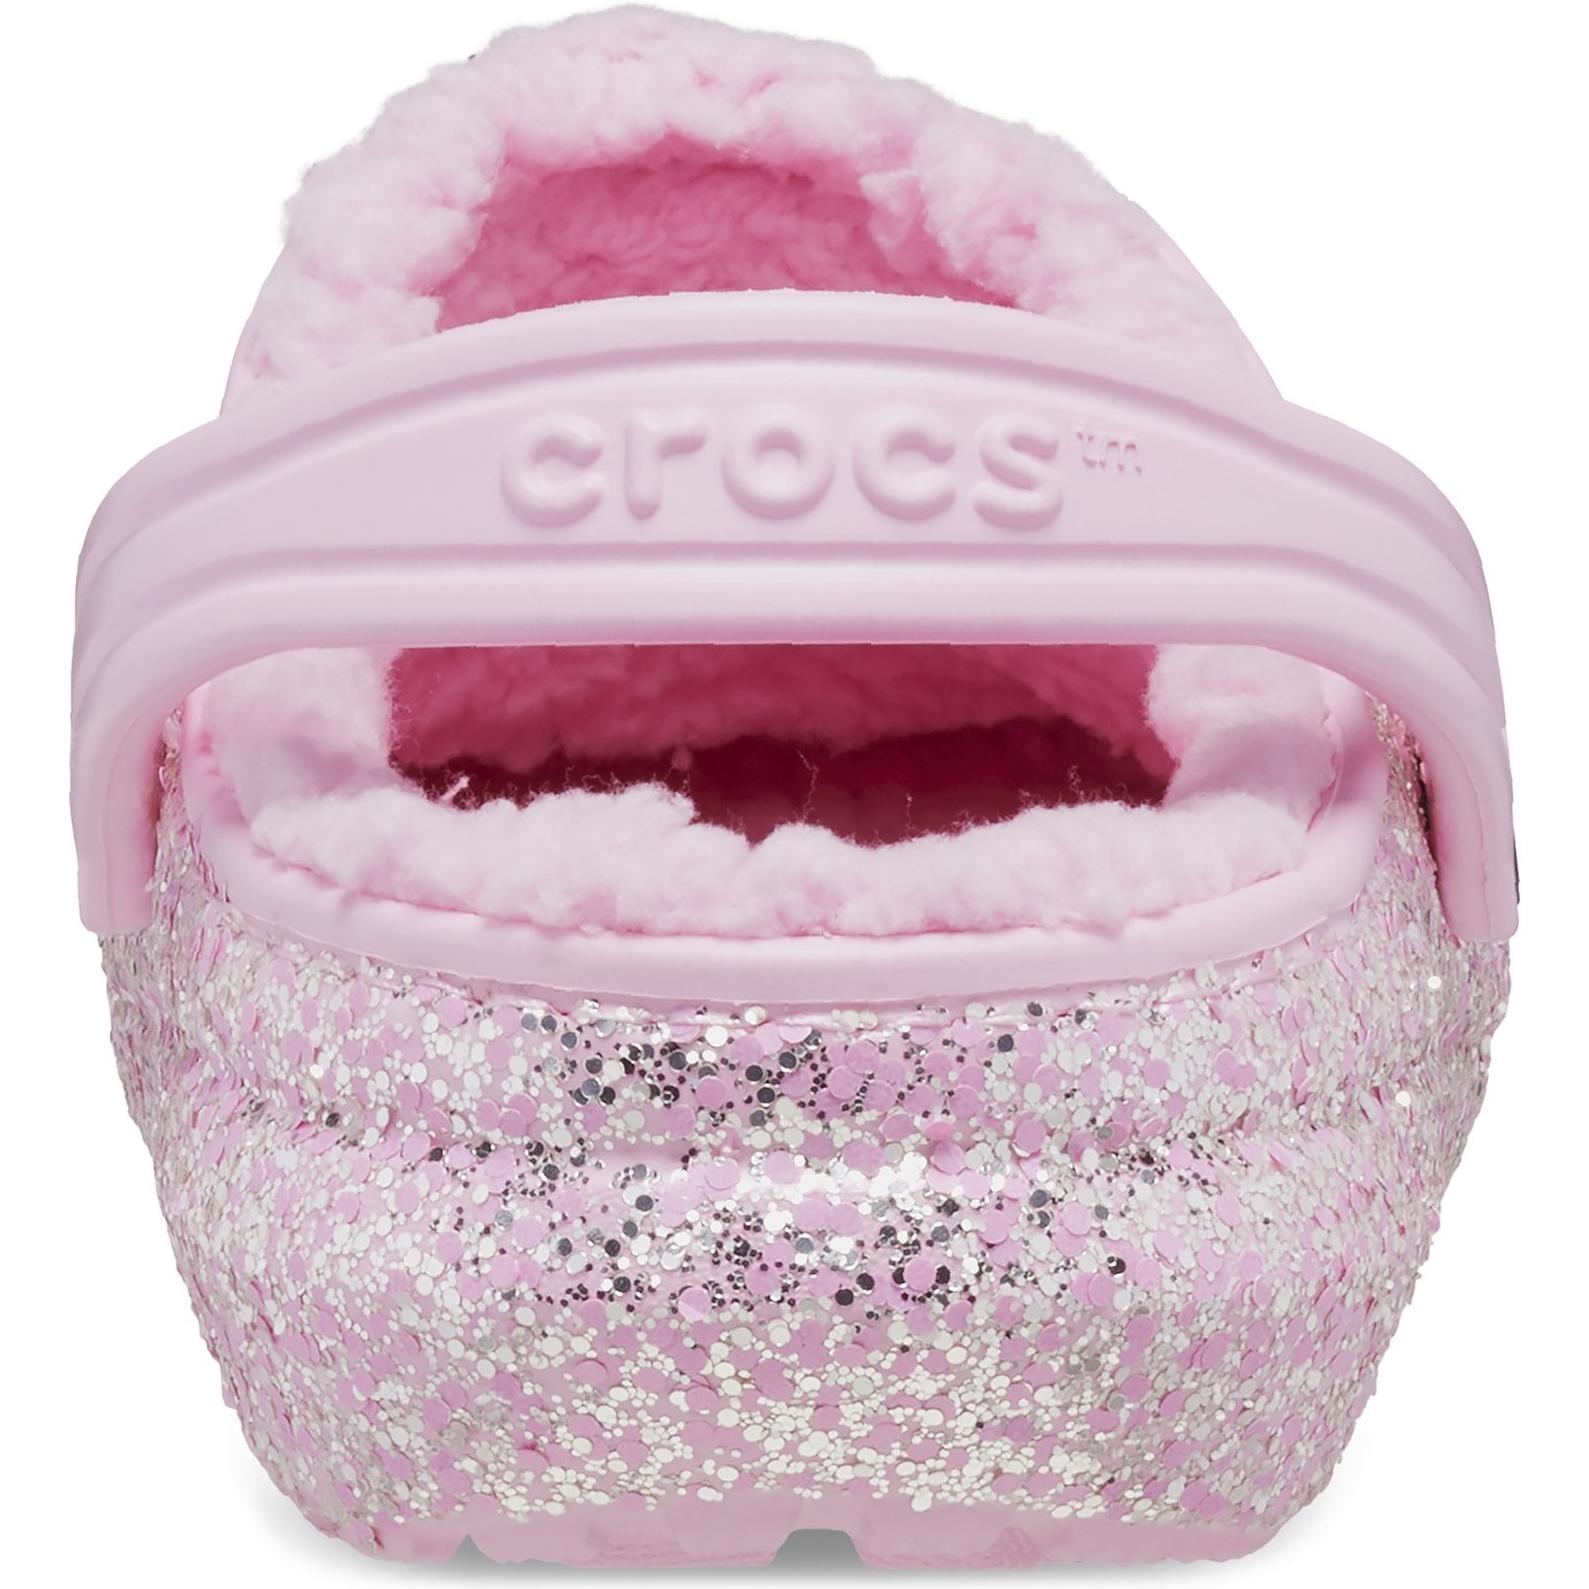 Crocs Toddlers' Classic Glitter Lined Clog Sandals